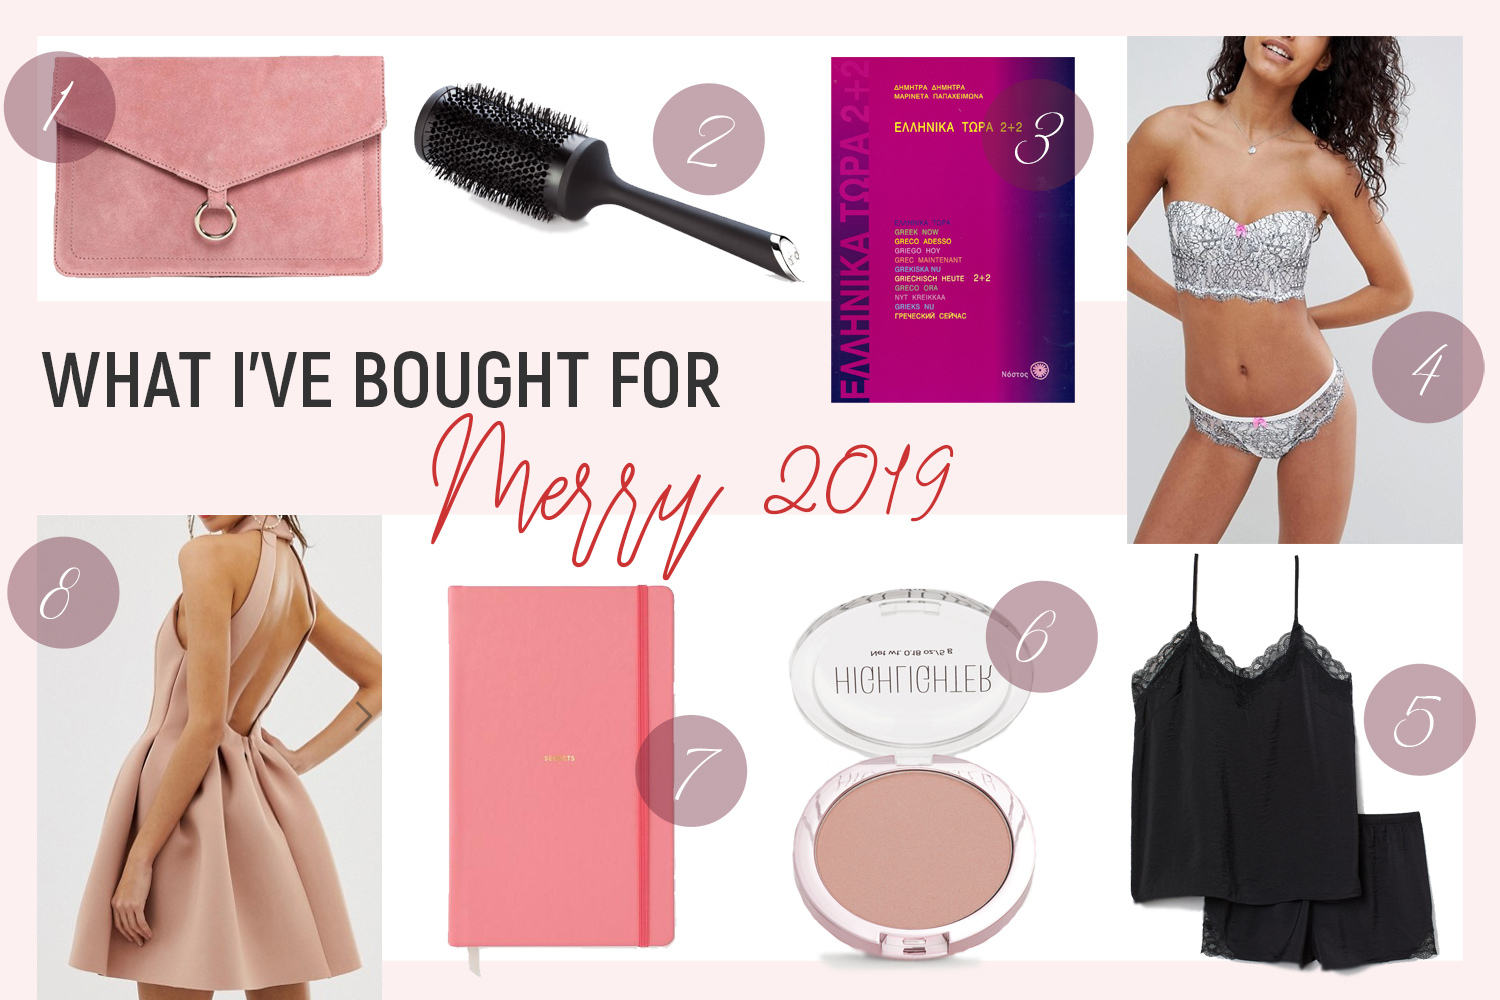 What I've bought for Merry 2019